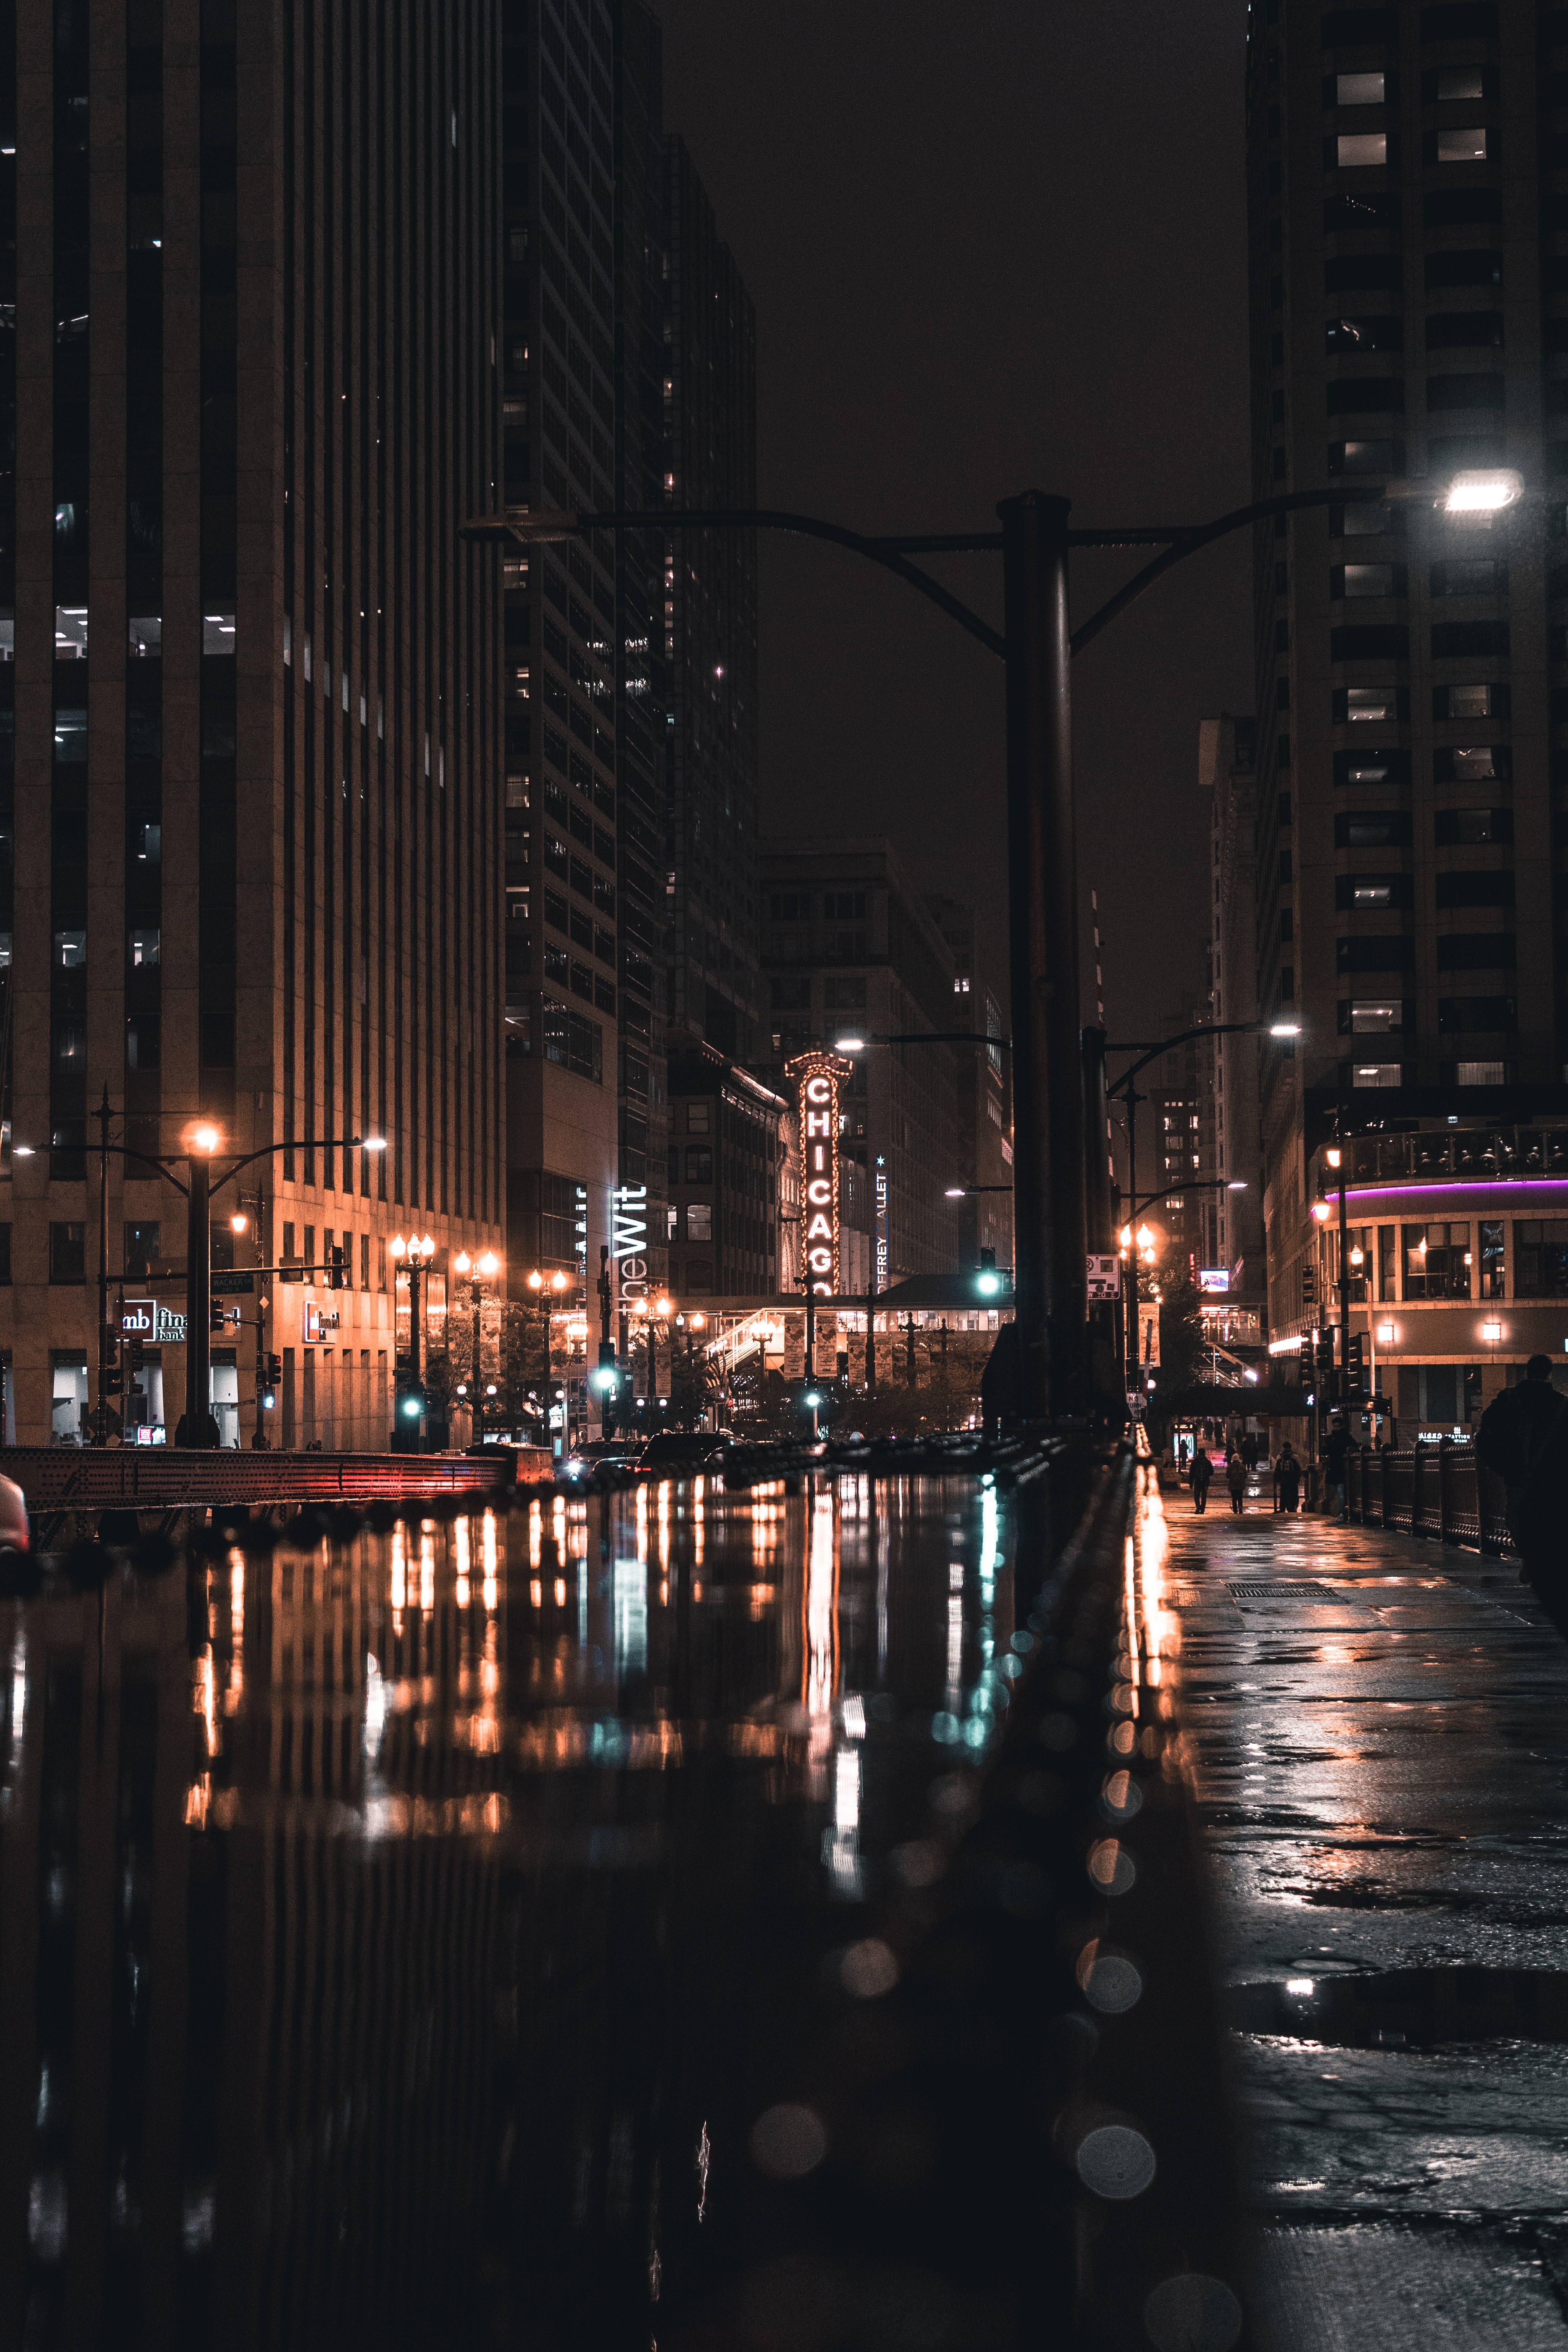 Windows Backgrounds chicago, night city, city lights, cities, architecture, usa, united states, street